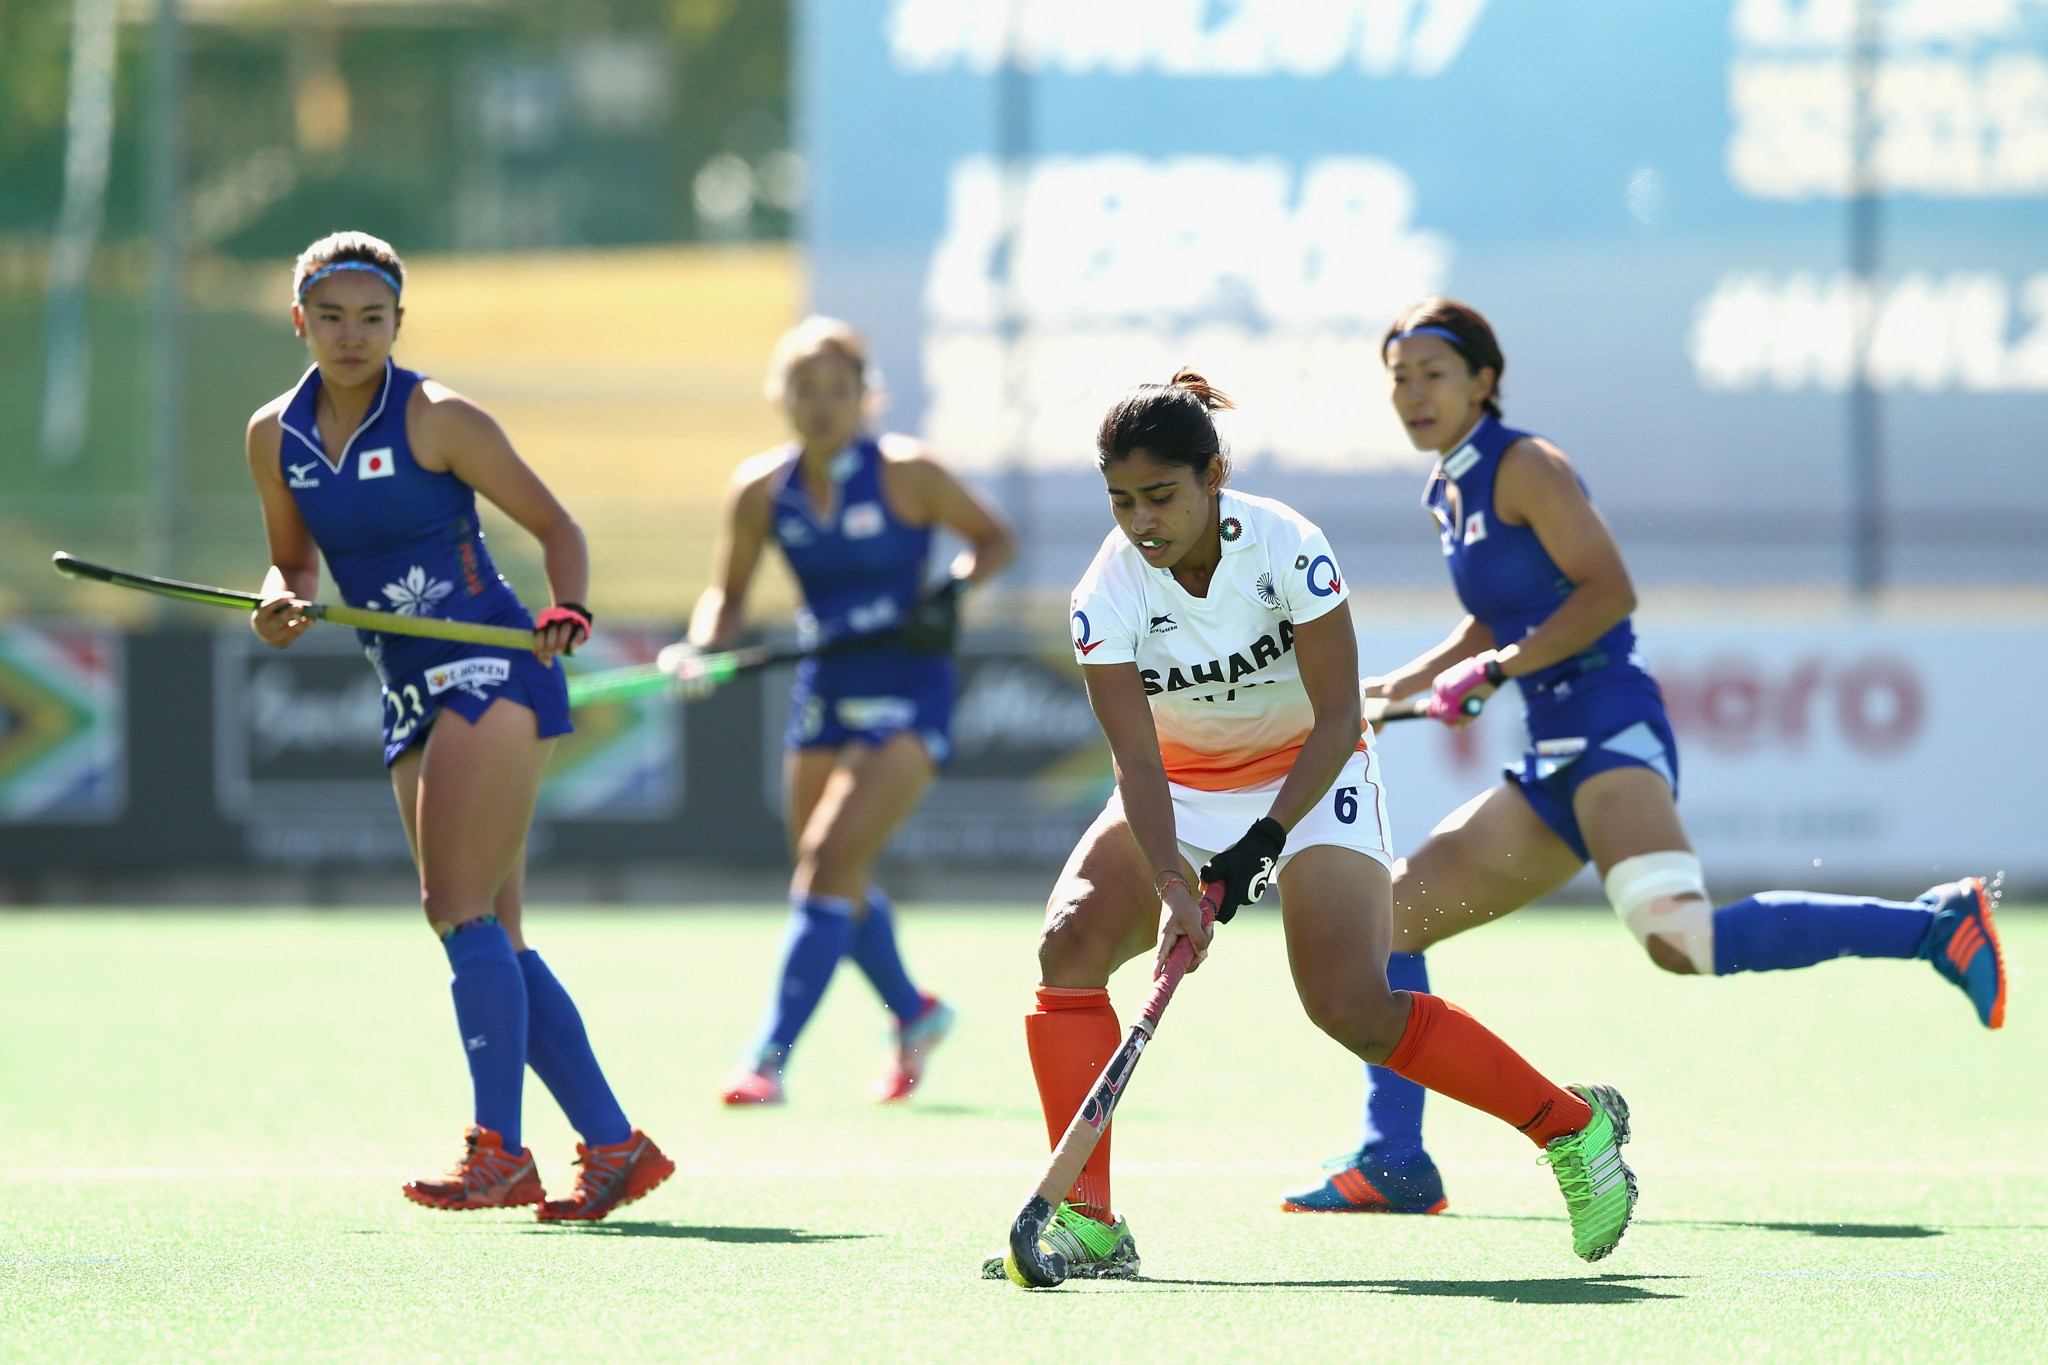 Gold Coast 2018: Indian women record an upset win over England in Commonwealth Games Hockey